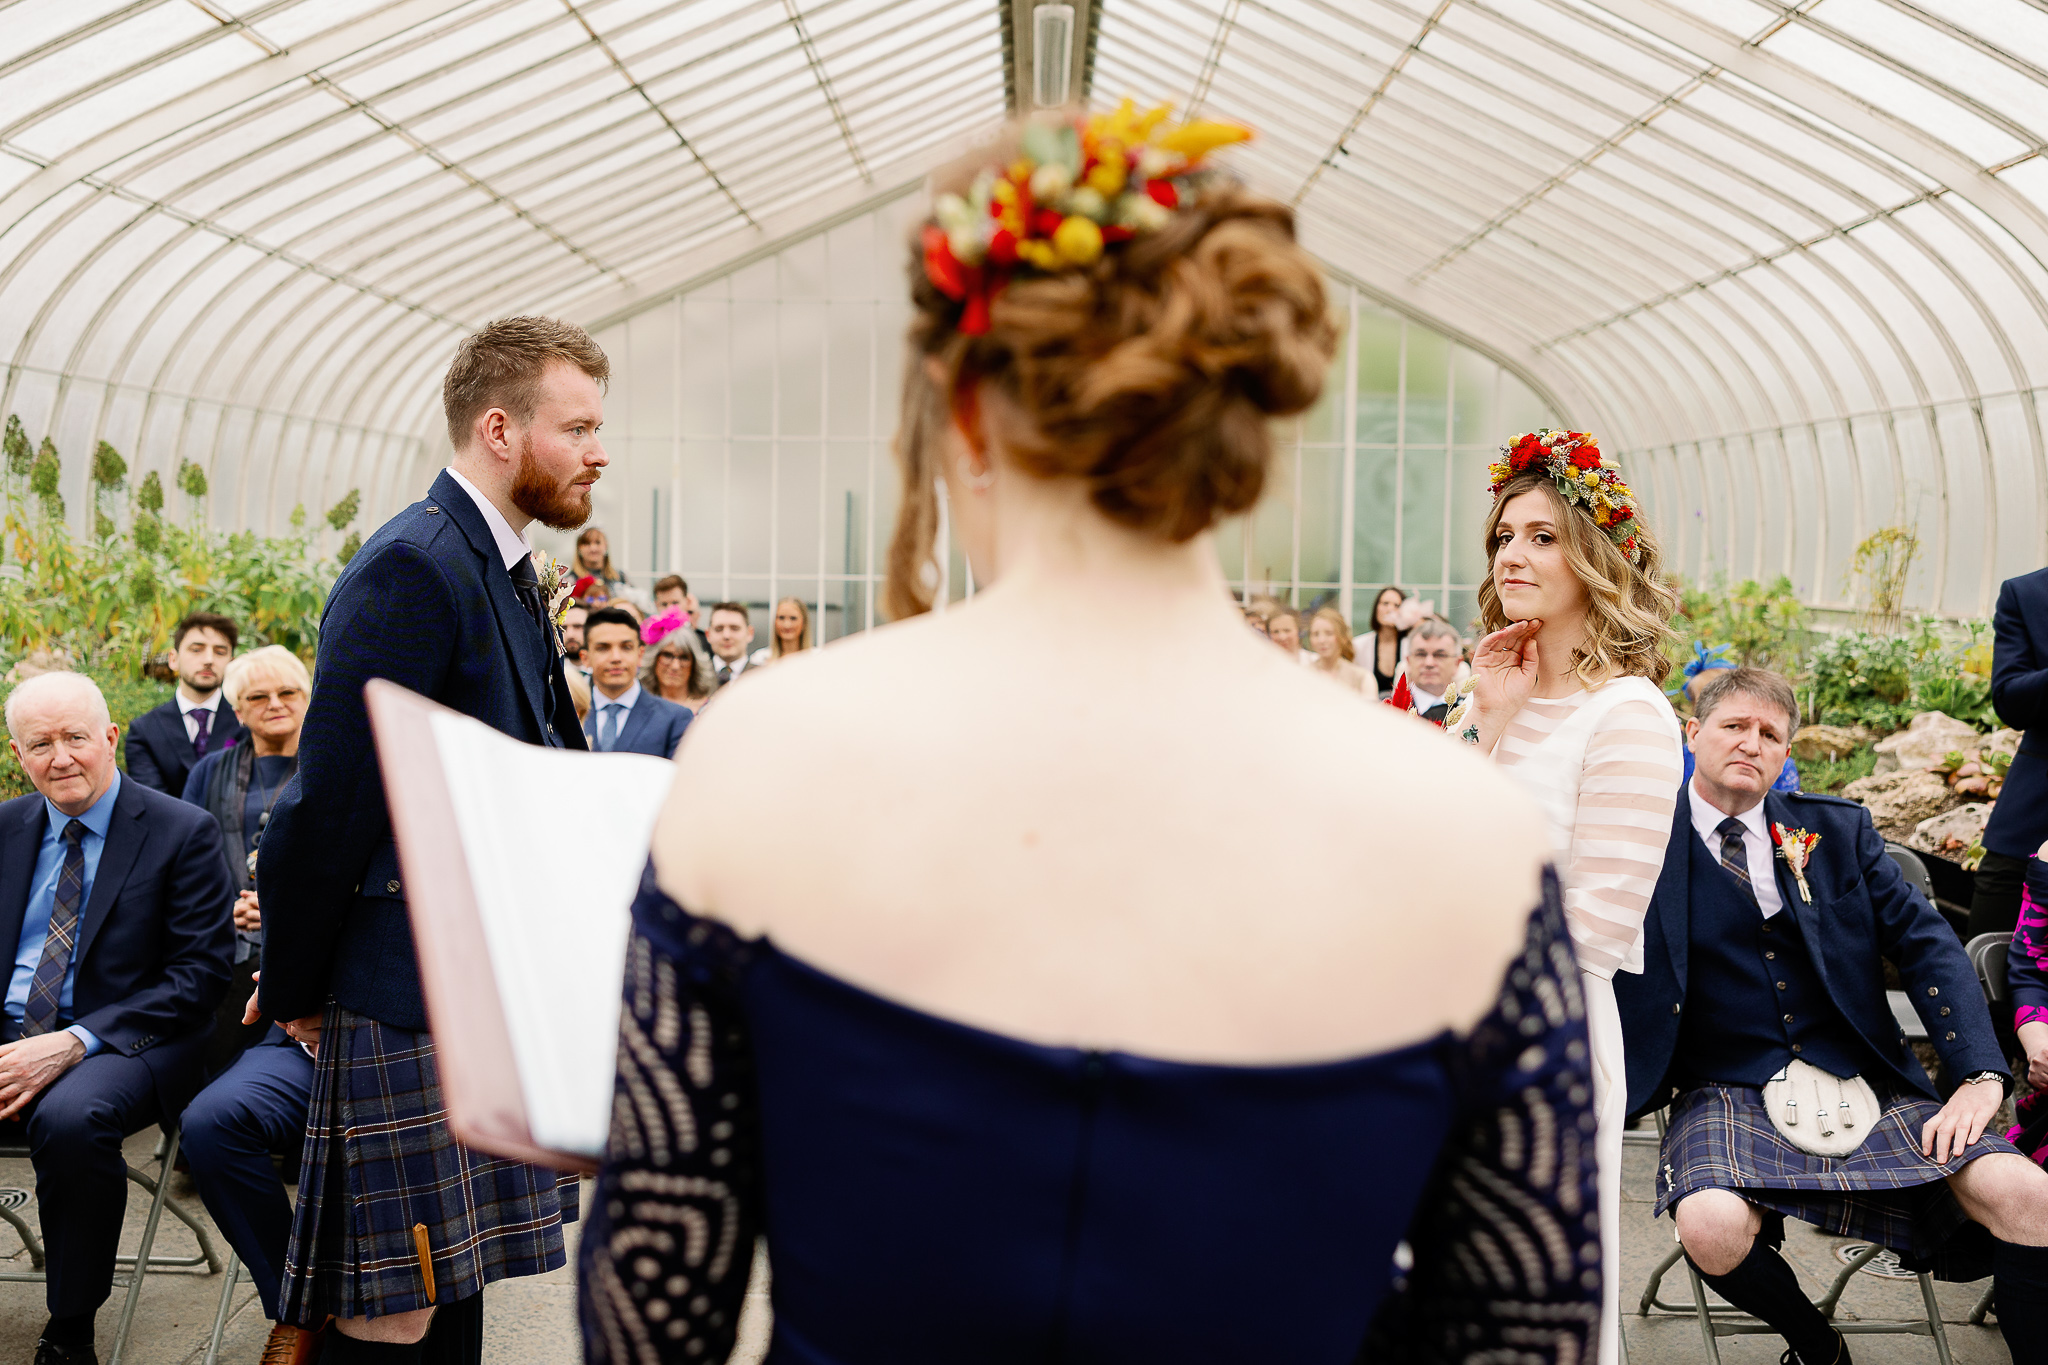 Humanist Ceremony in Kibble Palace in Glasgow 